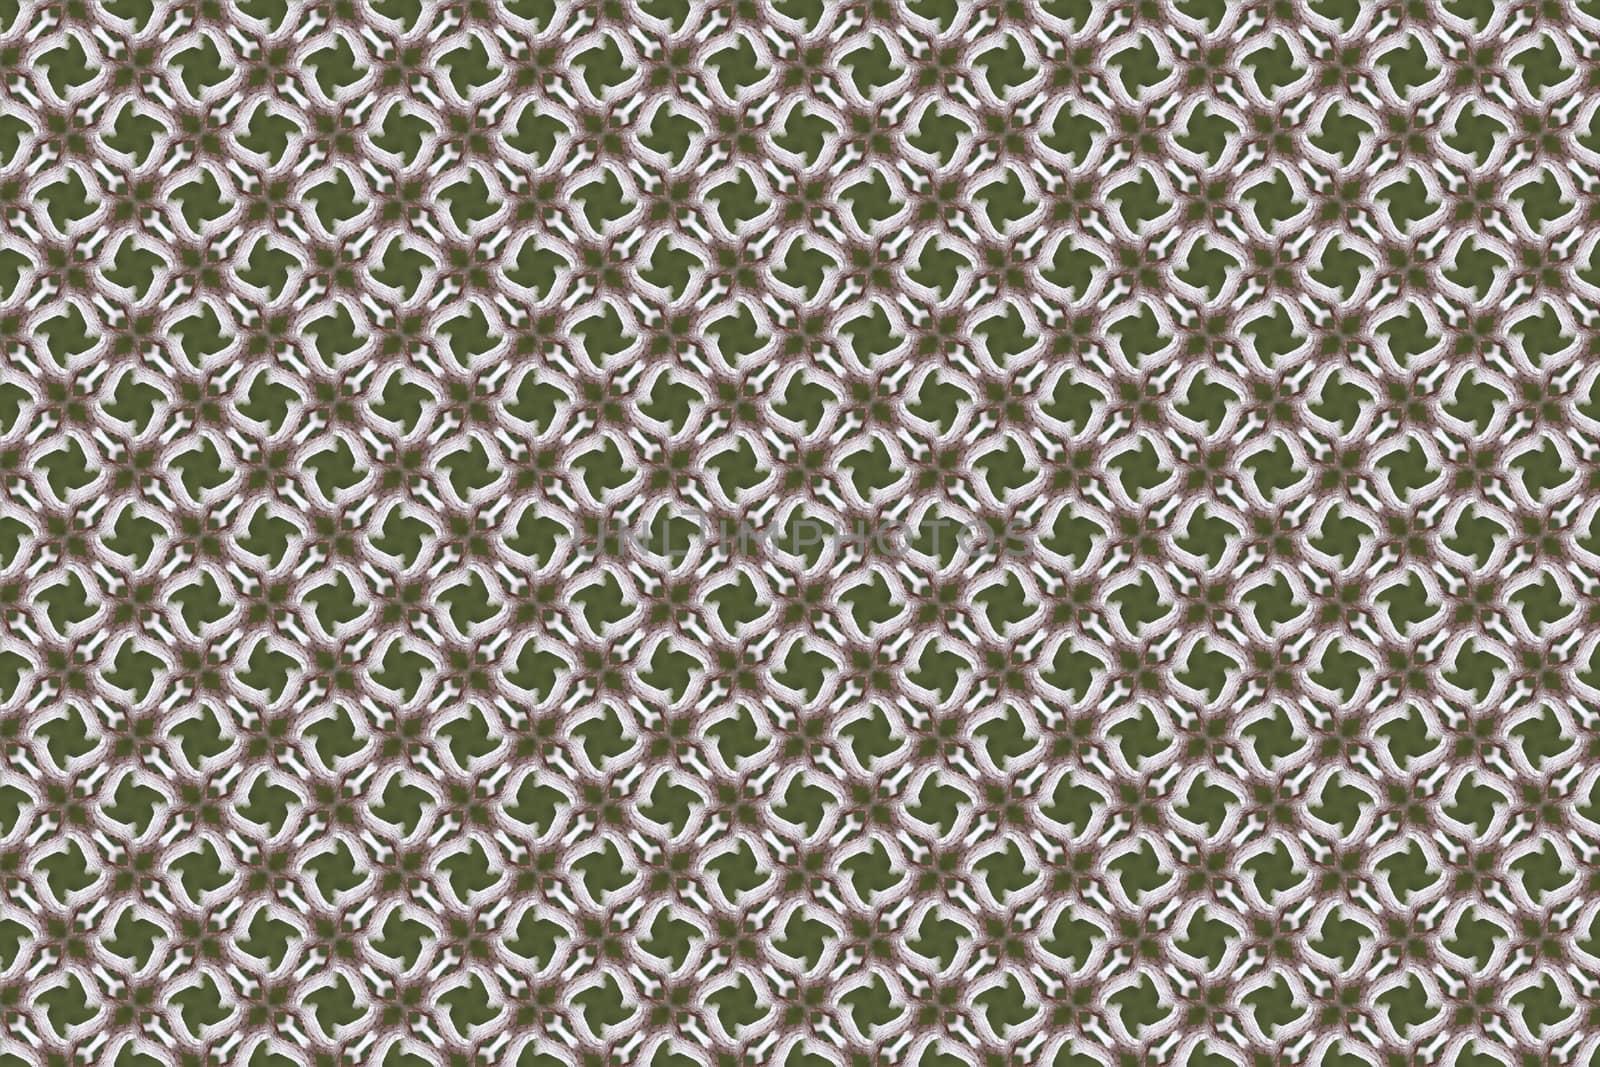 
Abstract background in the form of symmetric green tones cell